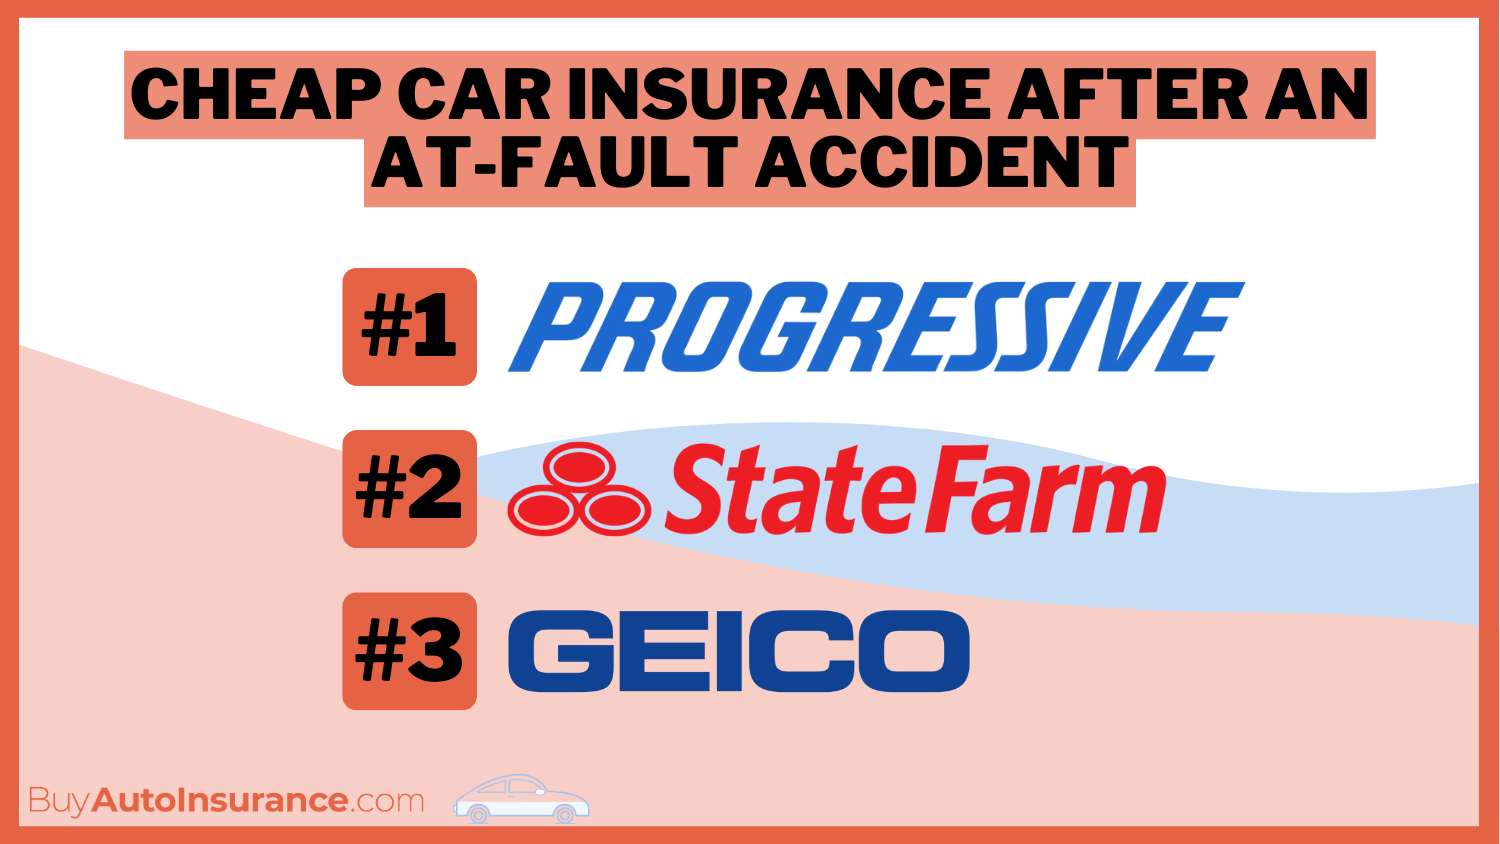 Progressive, State Farm, Geico: Cheap Car Insurance After an At-Fault